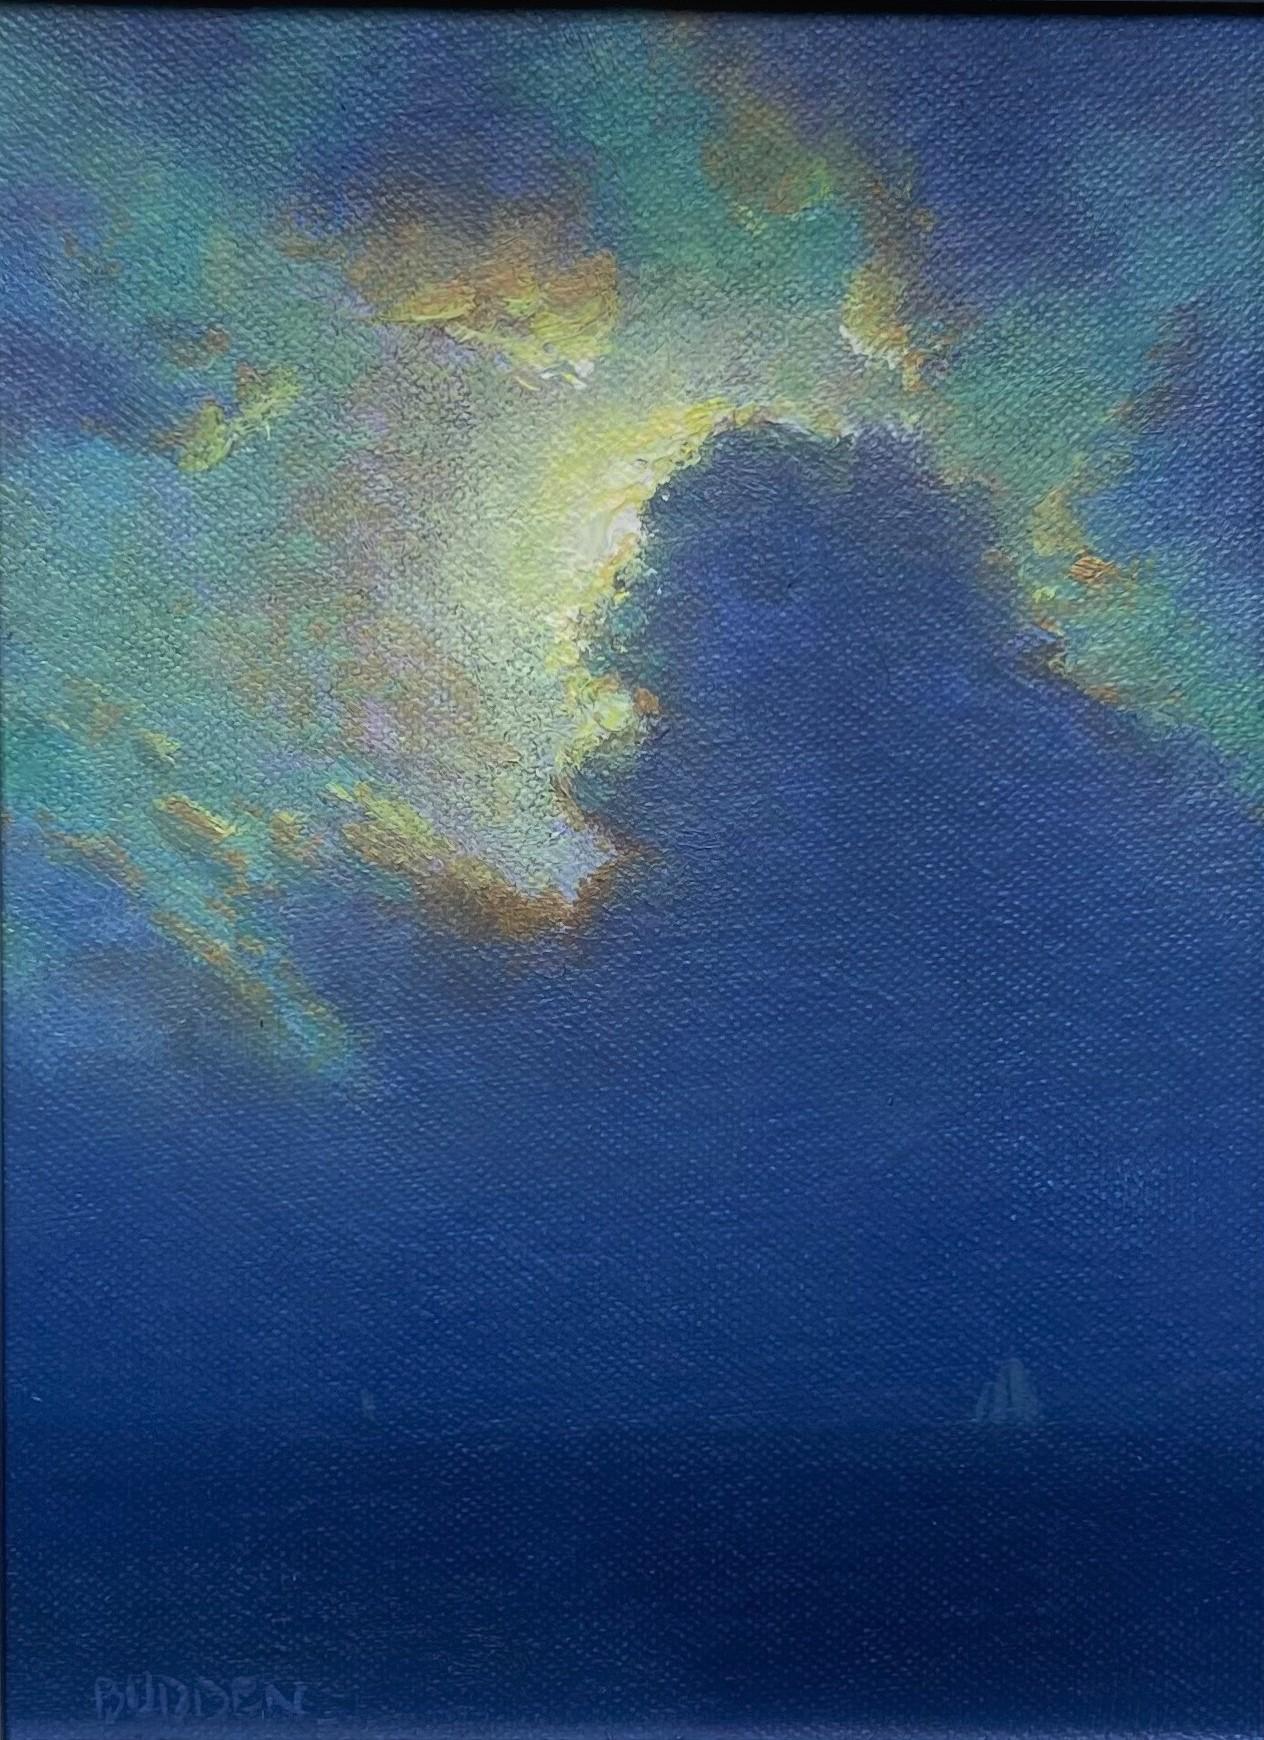 Impressionistic Seascape Painting Michael Budden Moonlight Nocturne For Sale 1